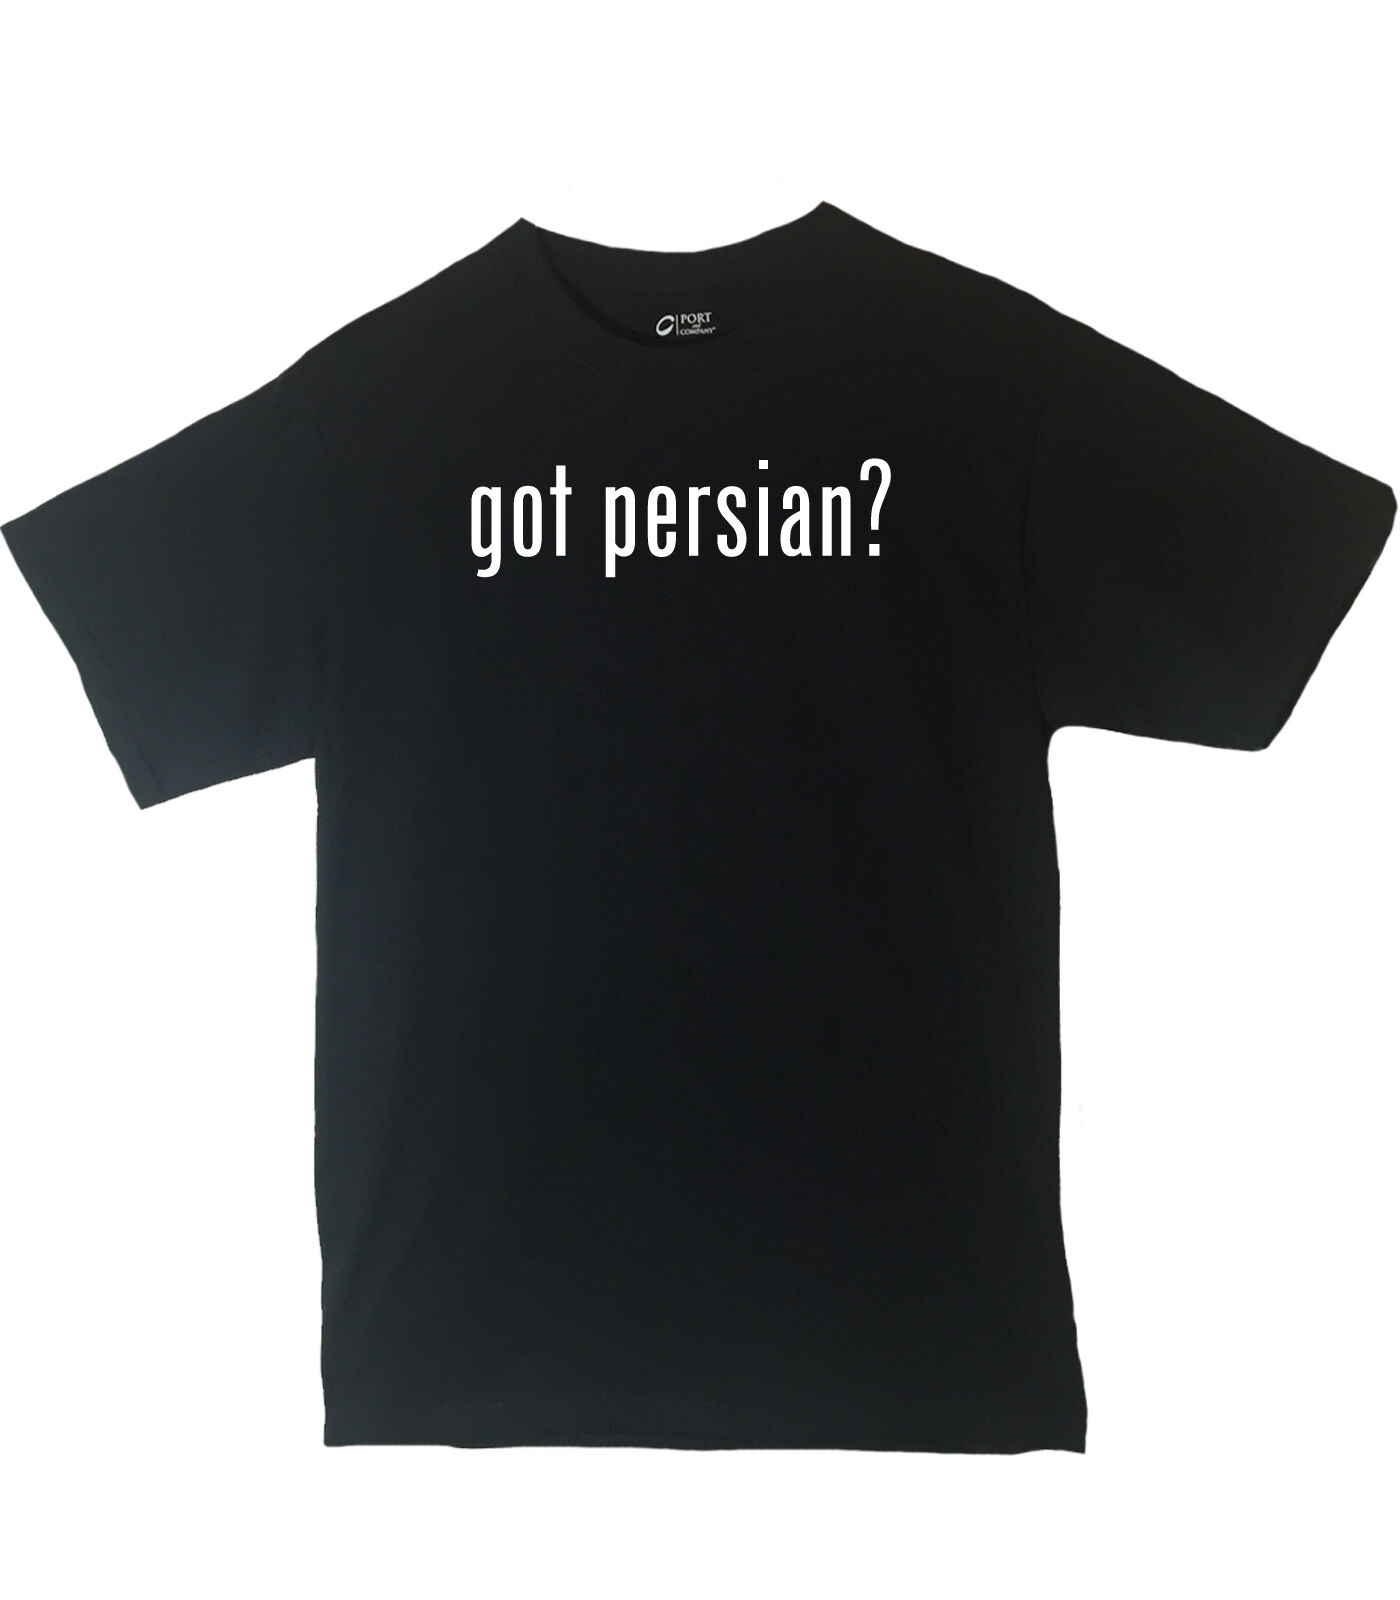 Got Persian? Shirt Country Pride Shirt Different Print Colors Inside